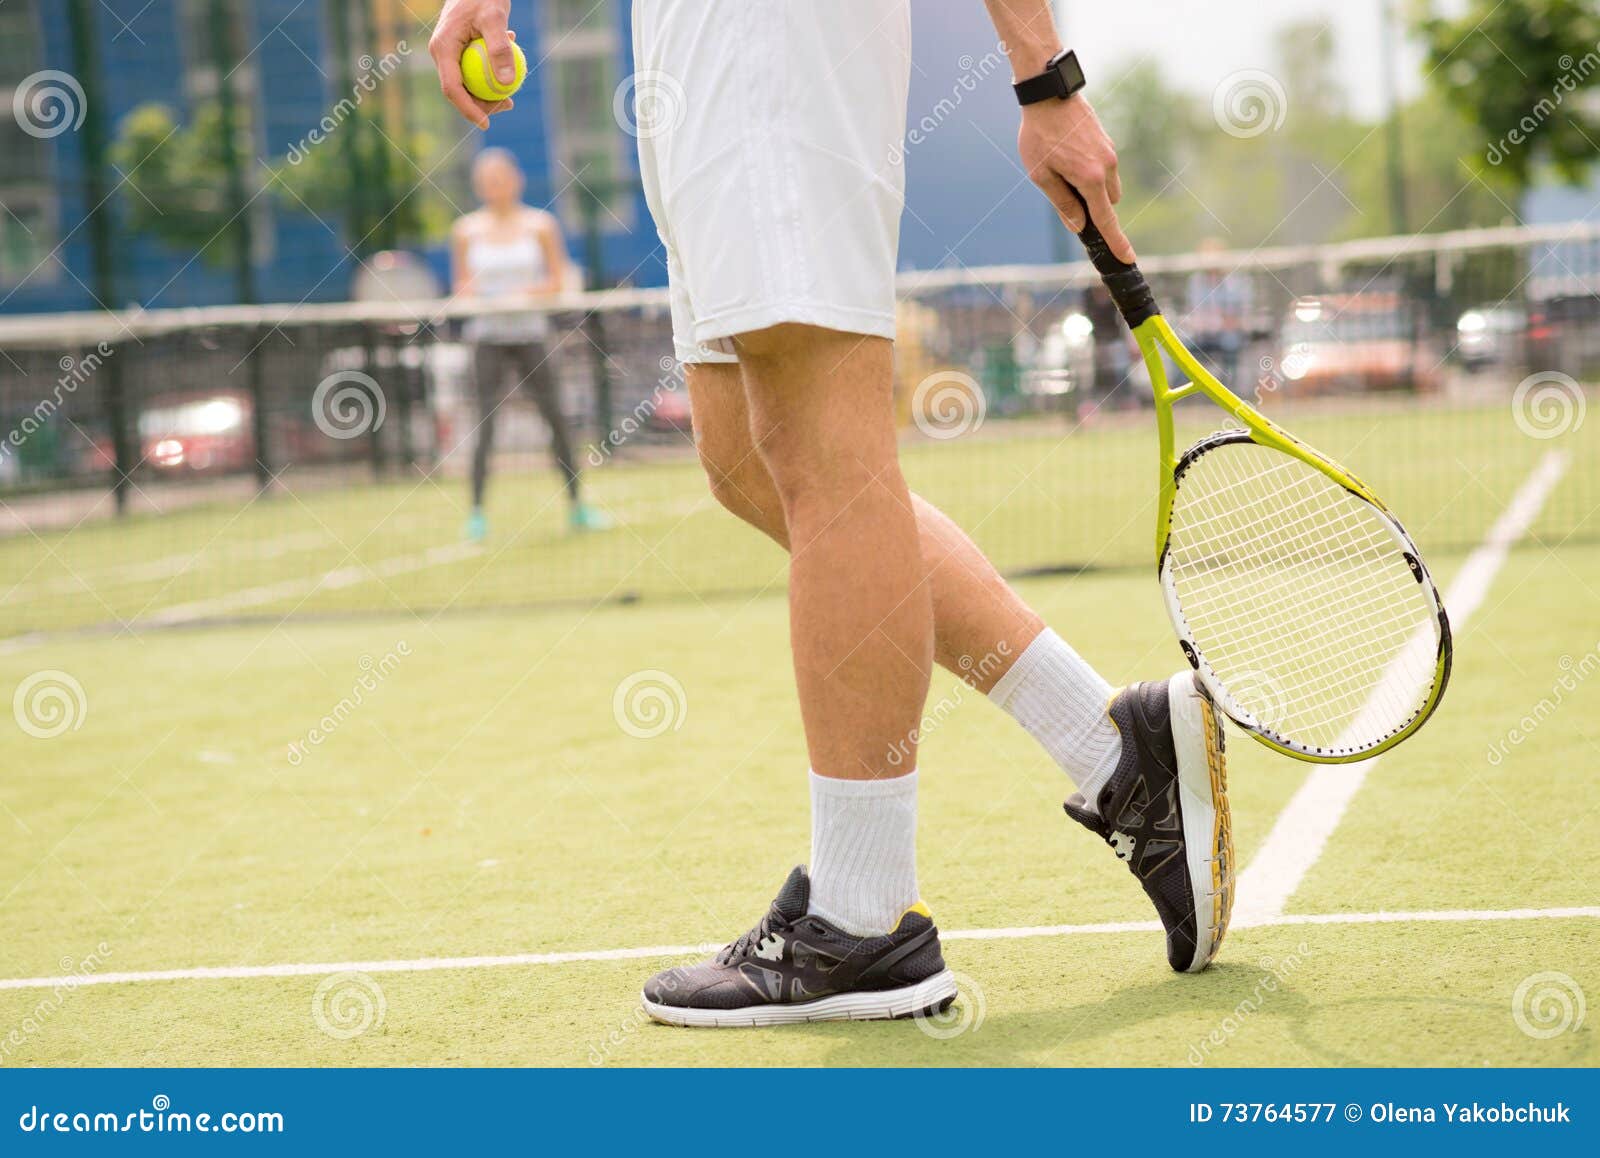 Professional Tennis Players Take Part In Competition Stock Image Image Of Racket Enjoyment